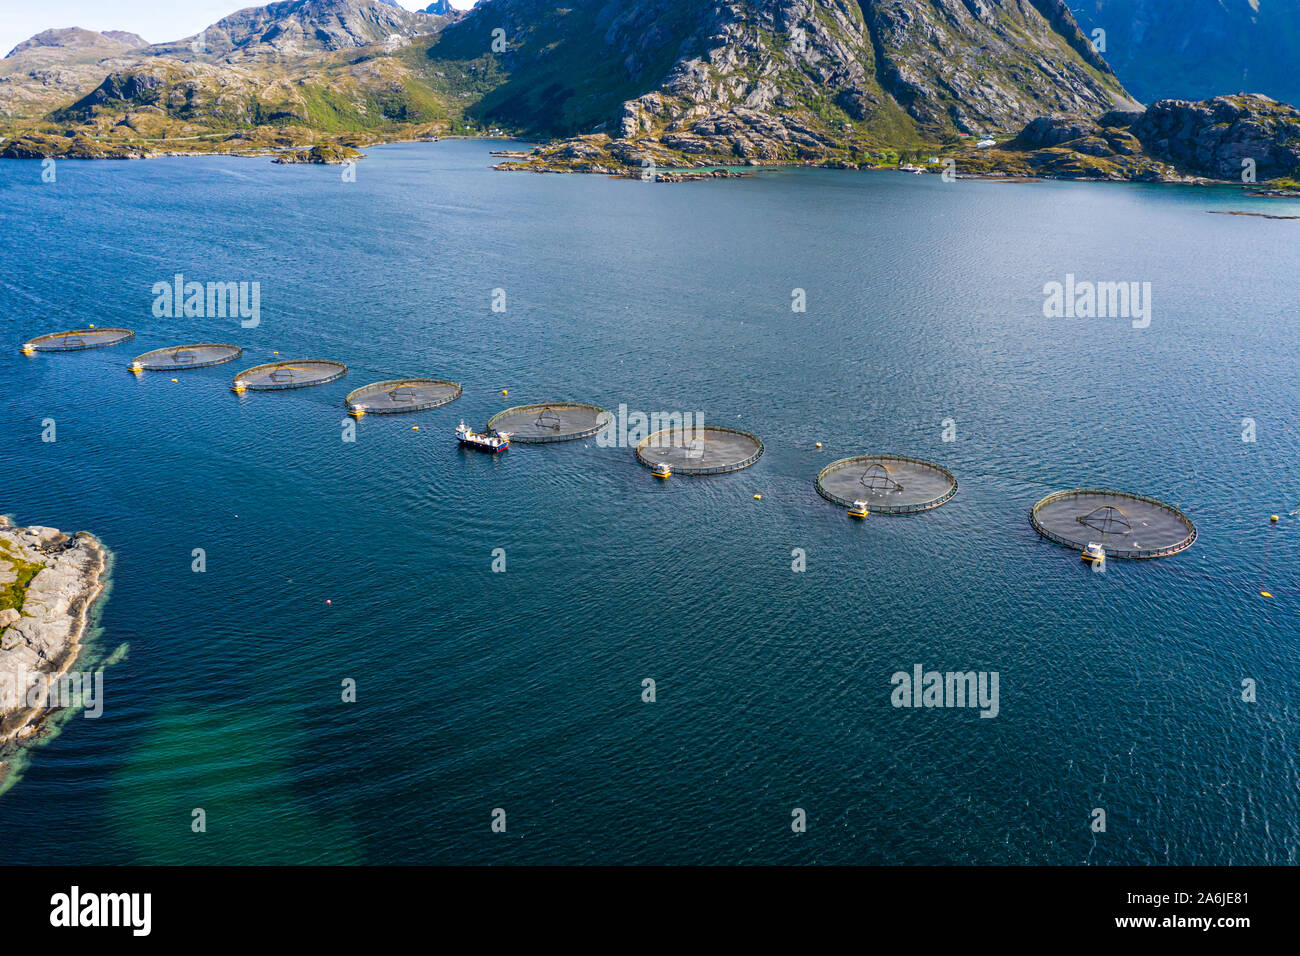 Farm salmon fishing in Norway. Norway is the biggest producer of farmed salmon in the world, with more than one million tonnes produced each year. Stock Photo